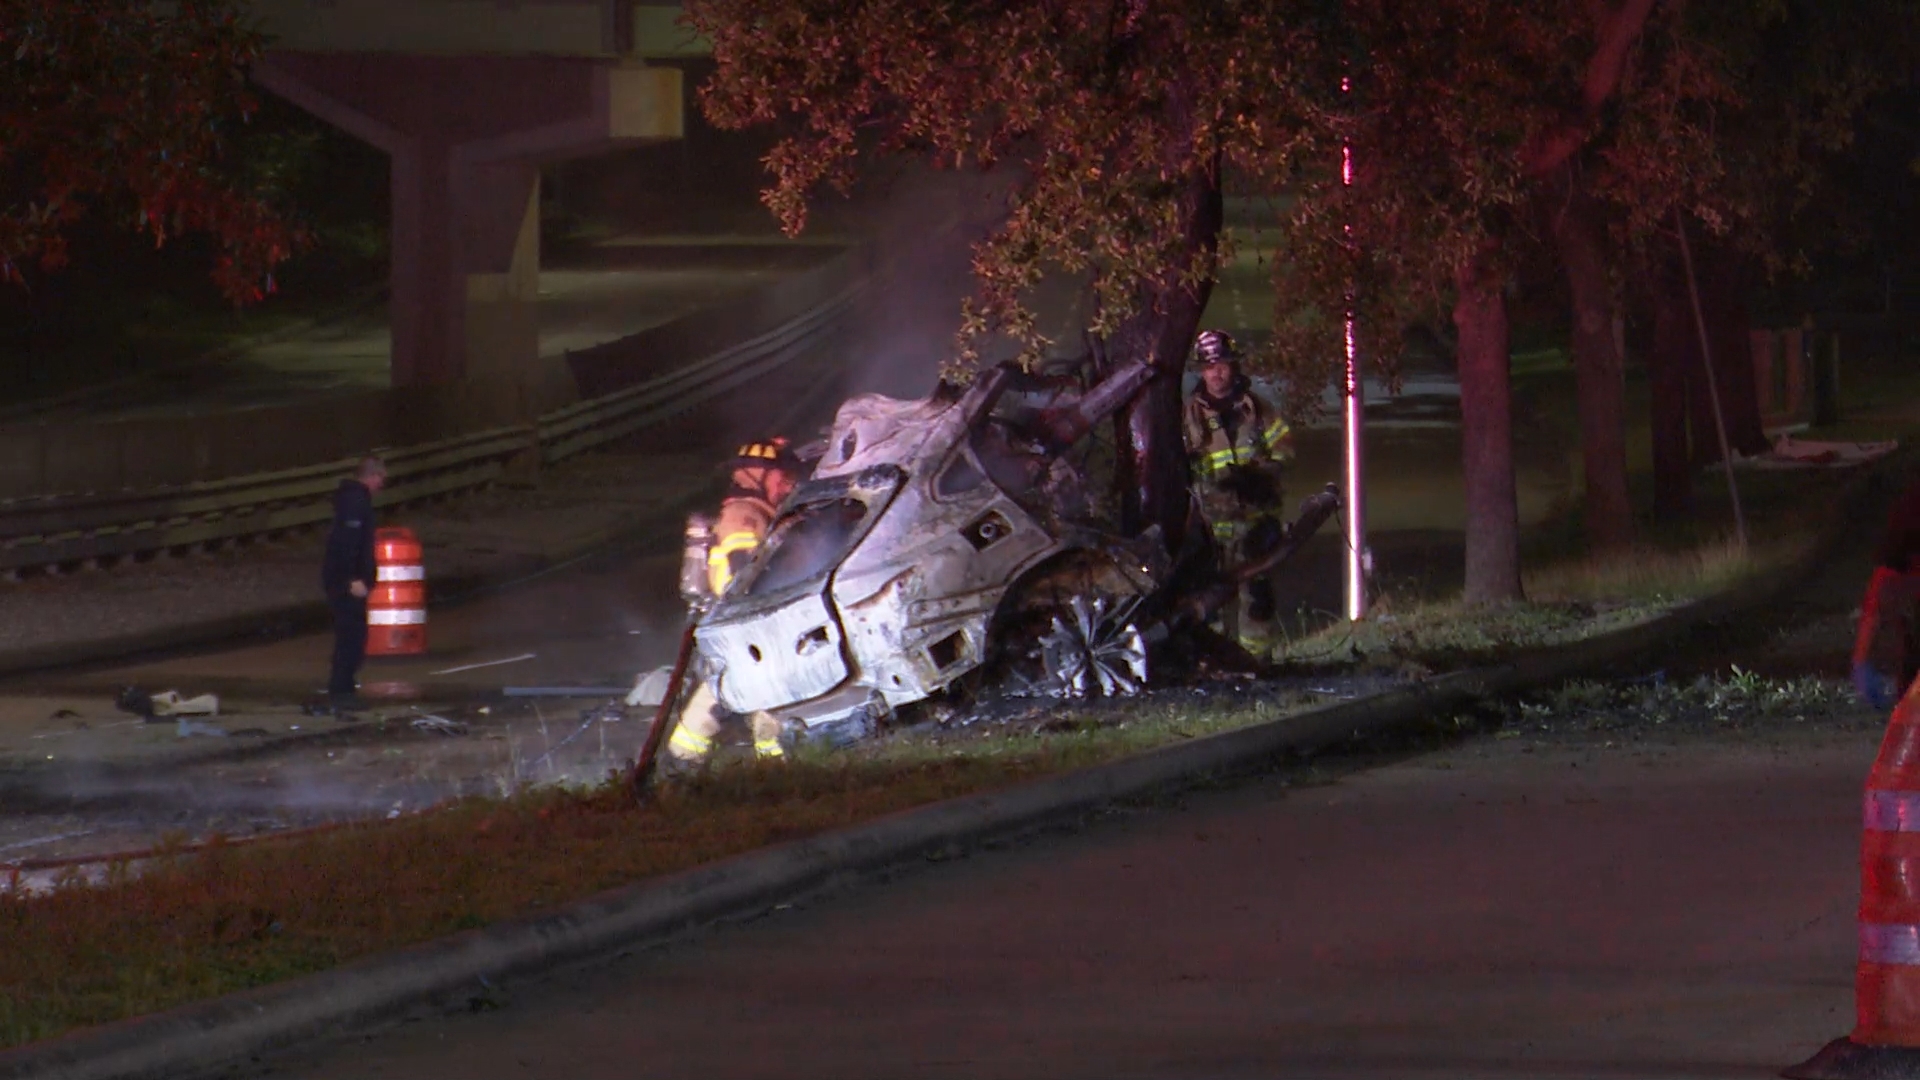 A woman died in a fiery crash that left their vehicle split in half on Memorial Drive Wednesday morning, according to the Houston Police Department.